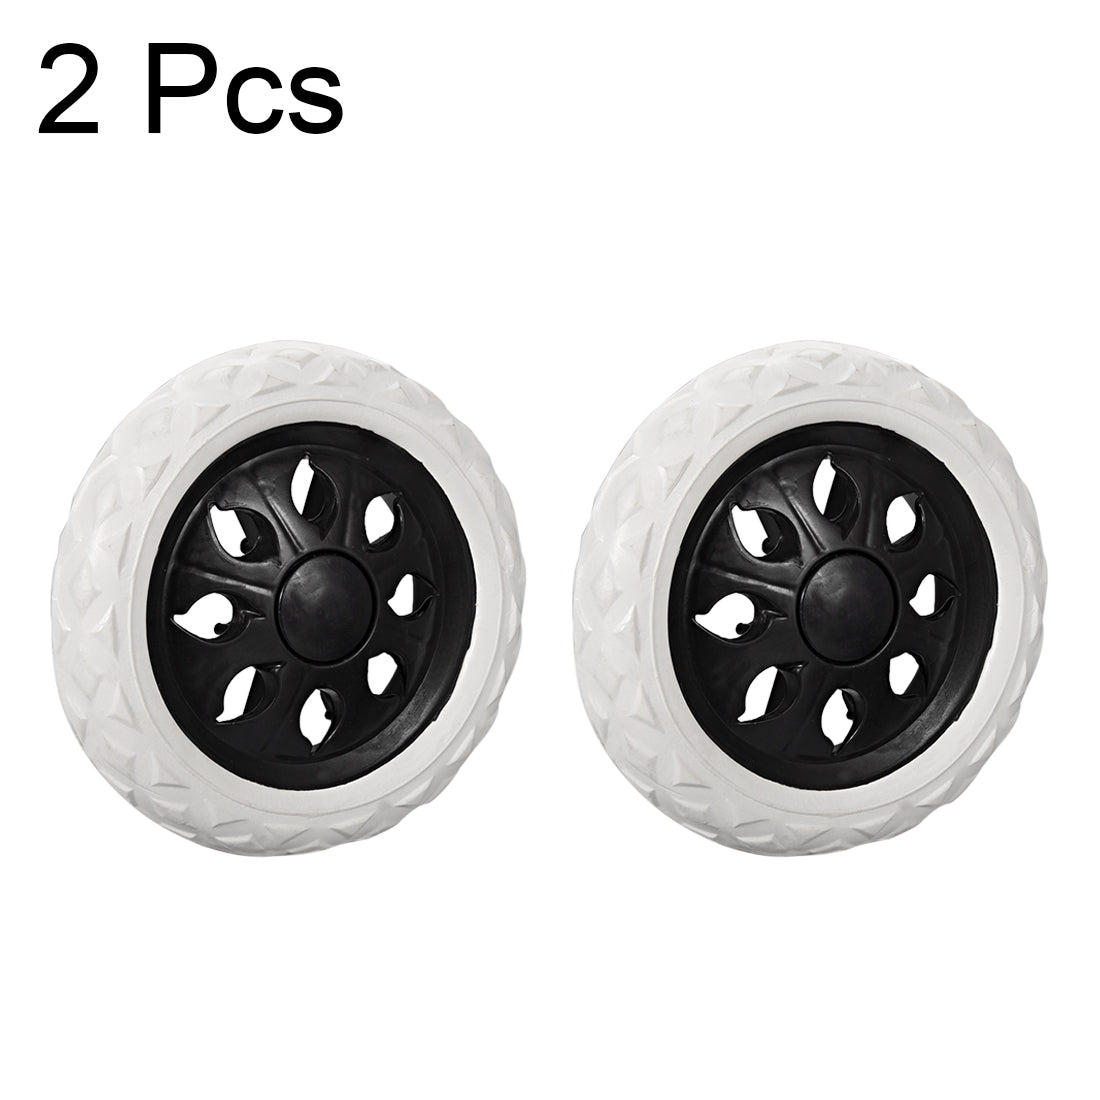 uxcell Uxcell Shopping Cart Wheels Trolley Caster Replacement mm Dia Rubber Foaming 2pcs